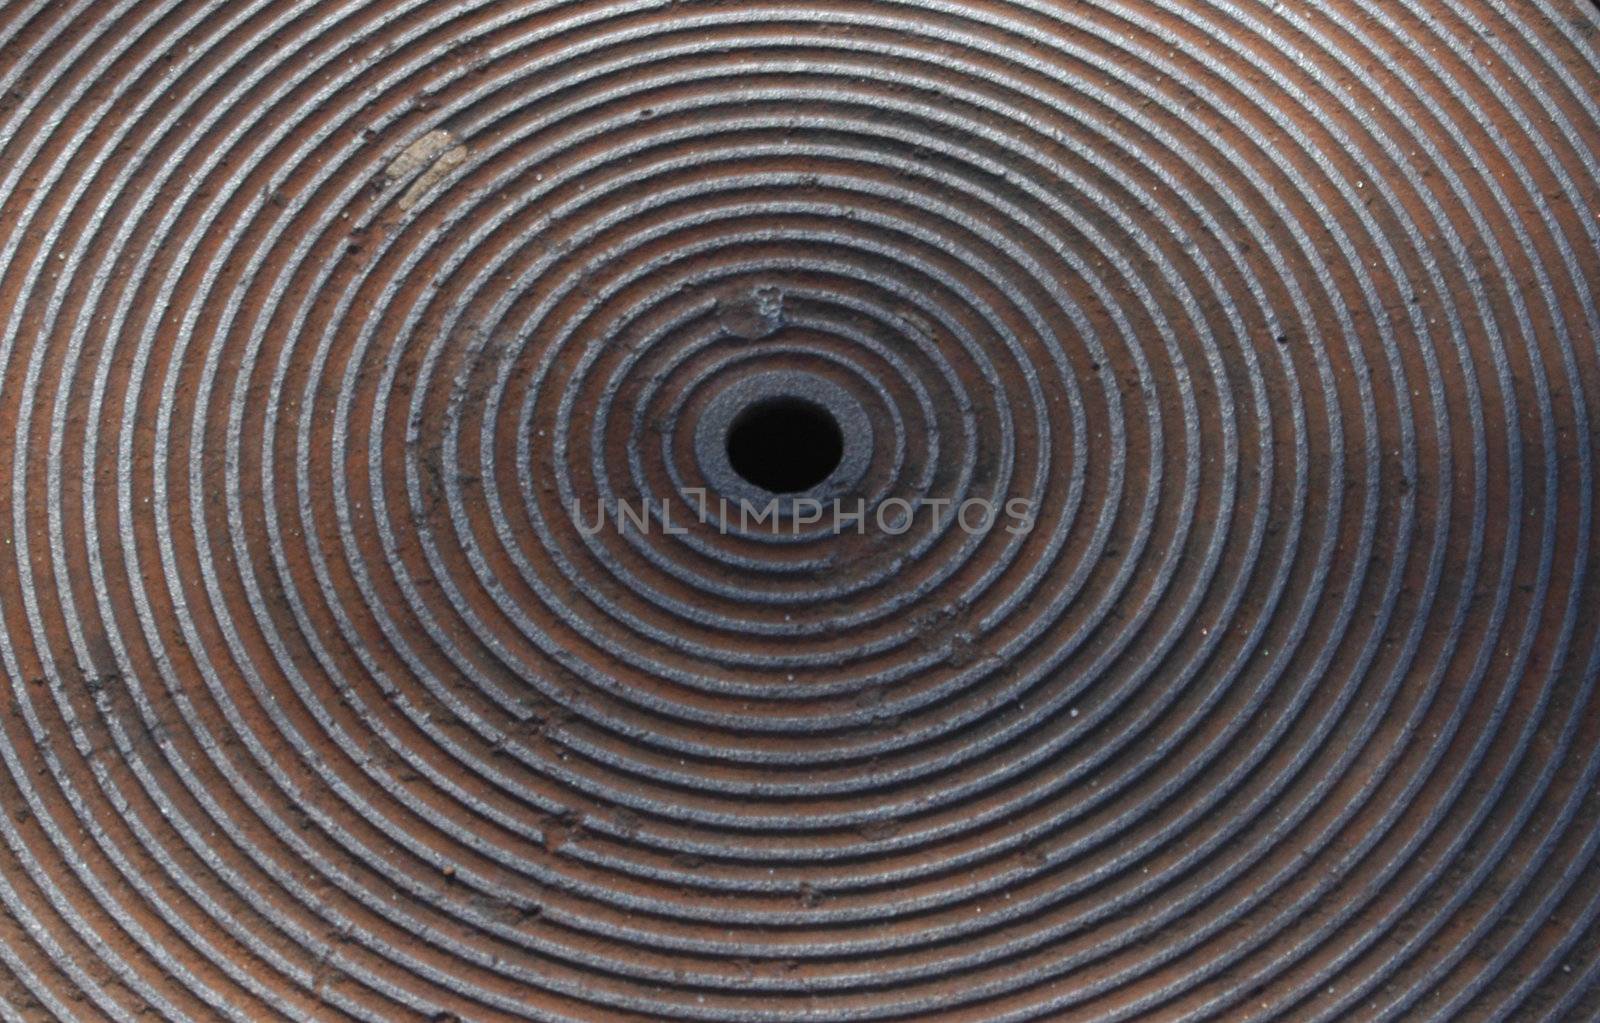 spiral manhole cover seen up close and making an interesting pattern